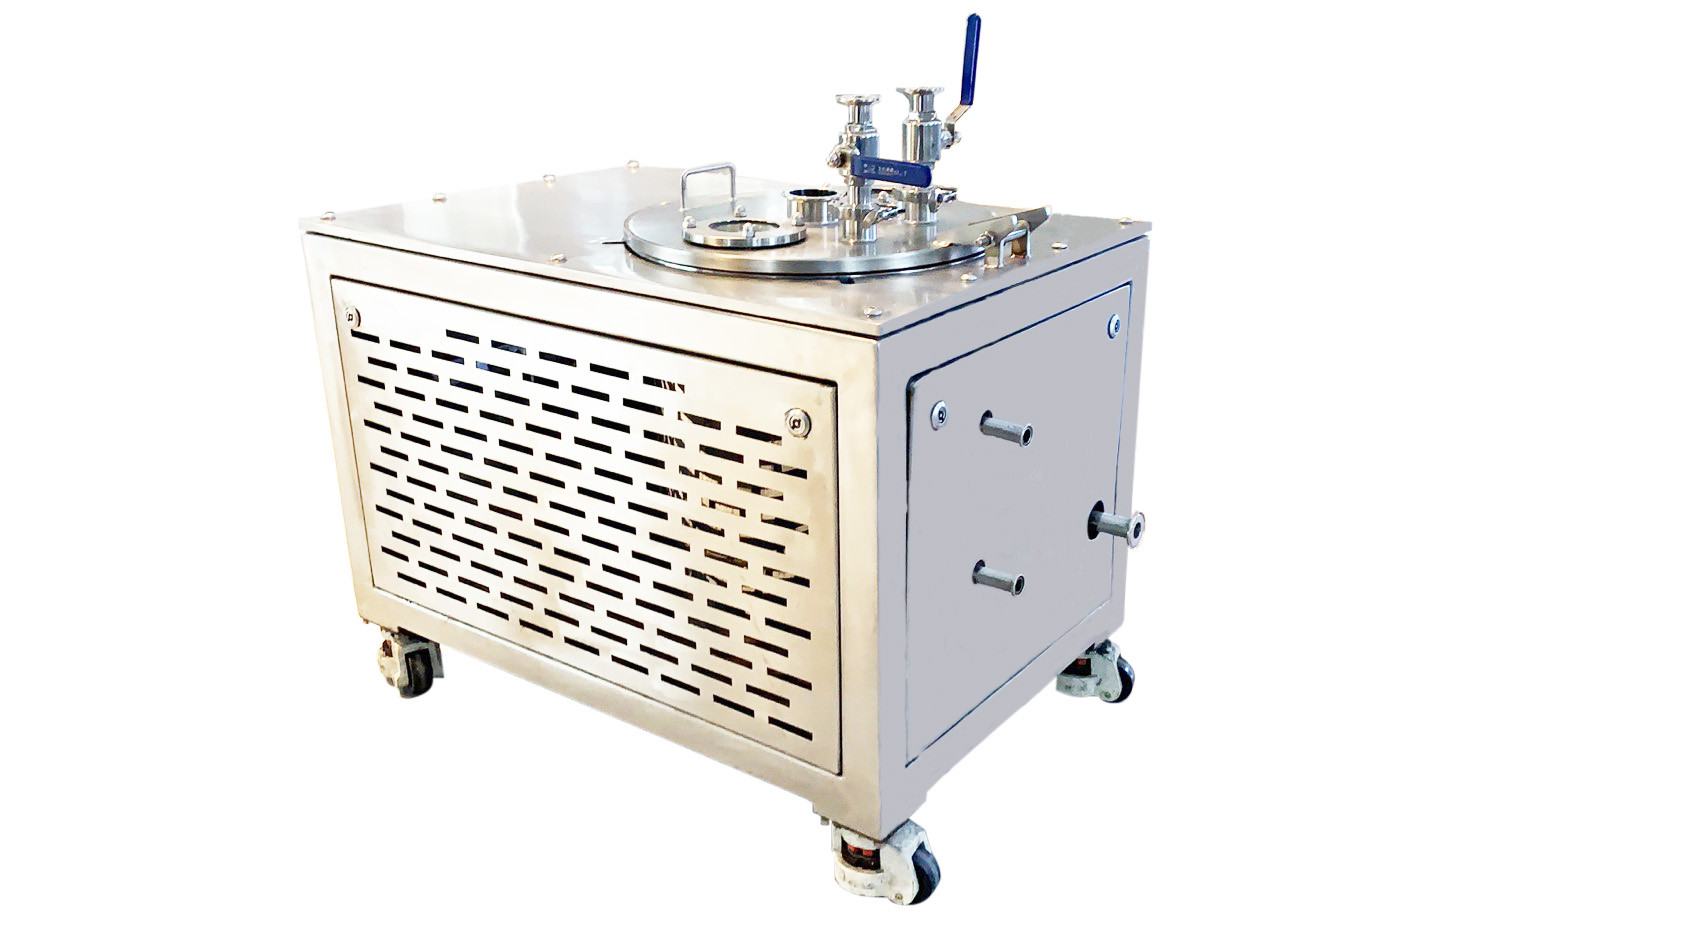 Amtech Centrifuge with table